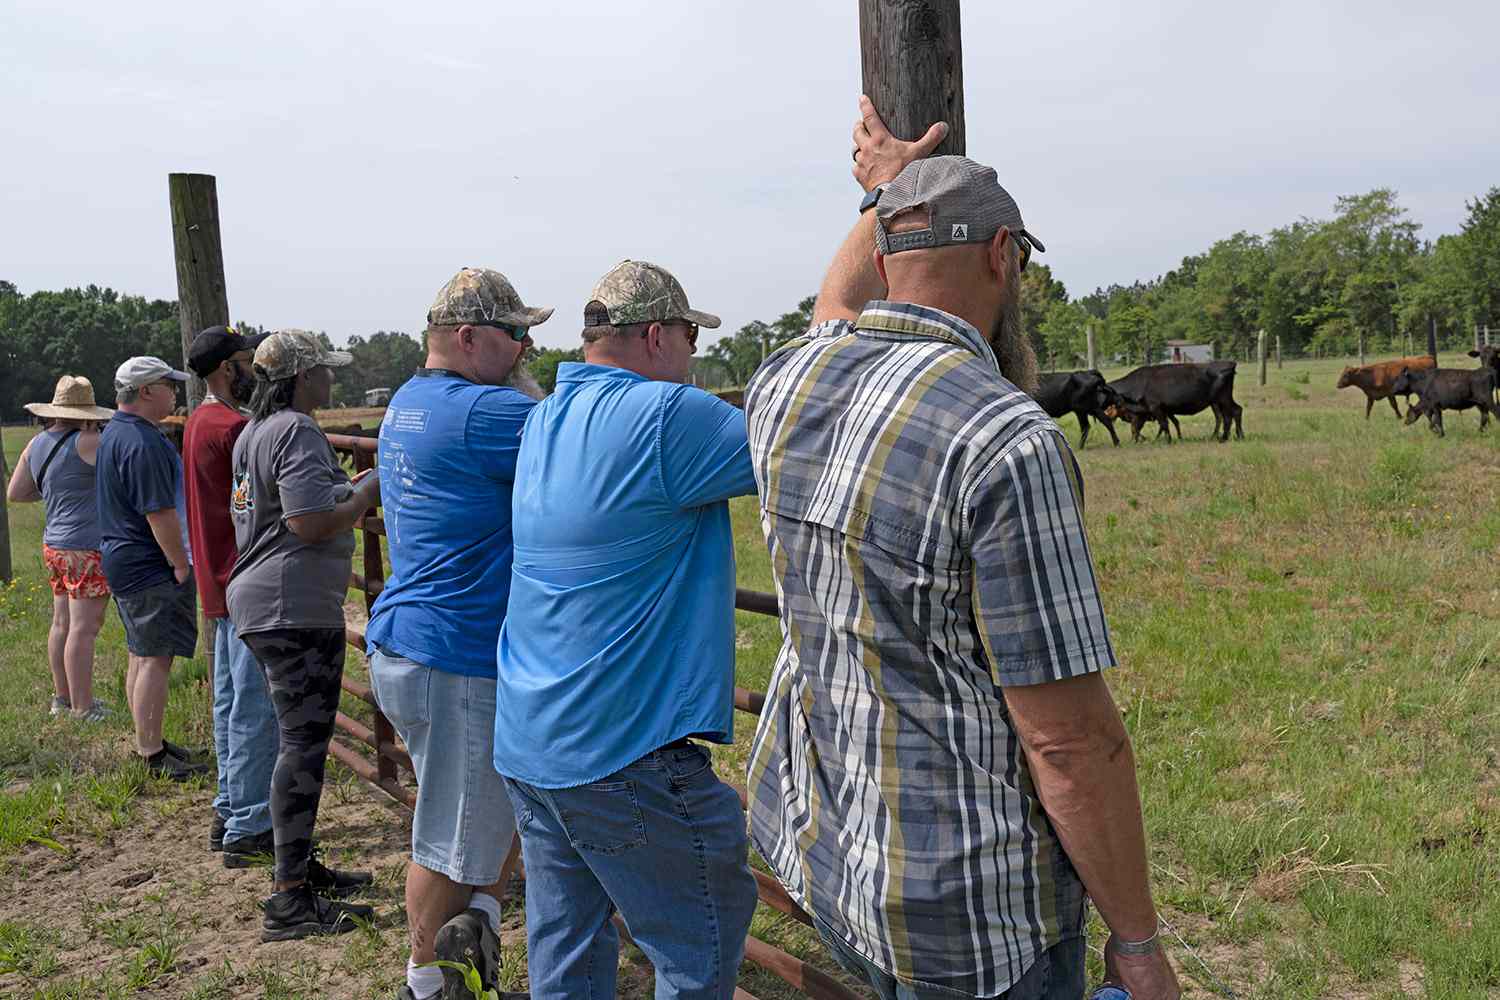 Marvin Frink, army vet, invited other vets to come to his farm to learn about agriculture and the healing benefits of farming. Photographed at Briarwood Cattle Farm, in Red Springs, NC on 5/21/22 by Kennedi Carter, @internetbby